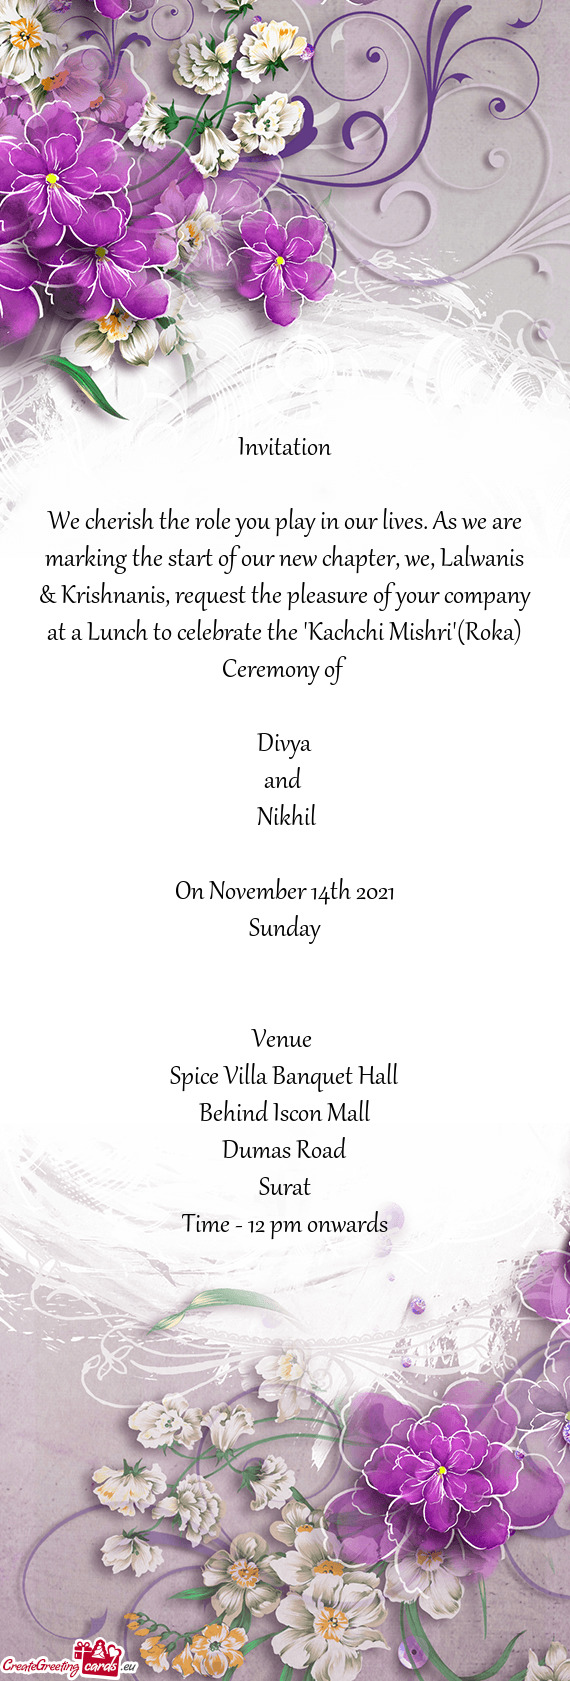 Nis & Krishnanis, request the pleasure of your company at a Lunch to celebrate the "Kachchi Mishri"(